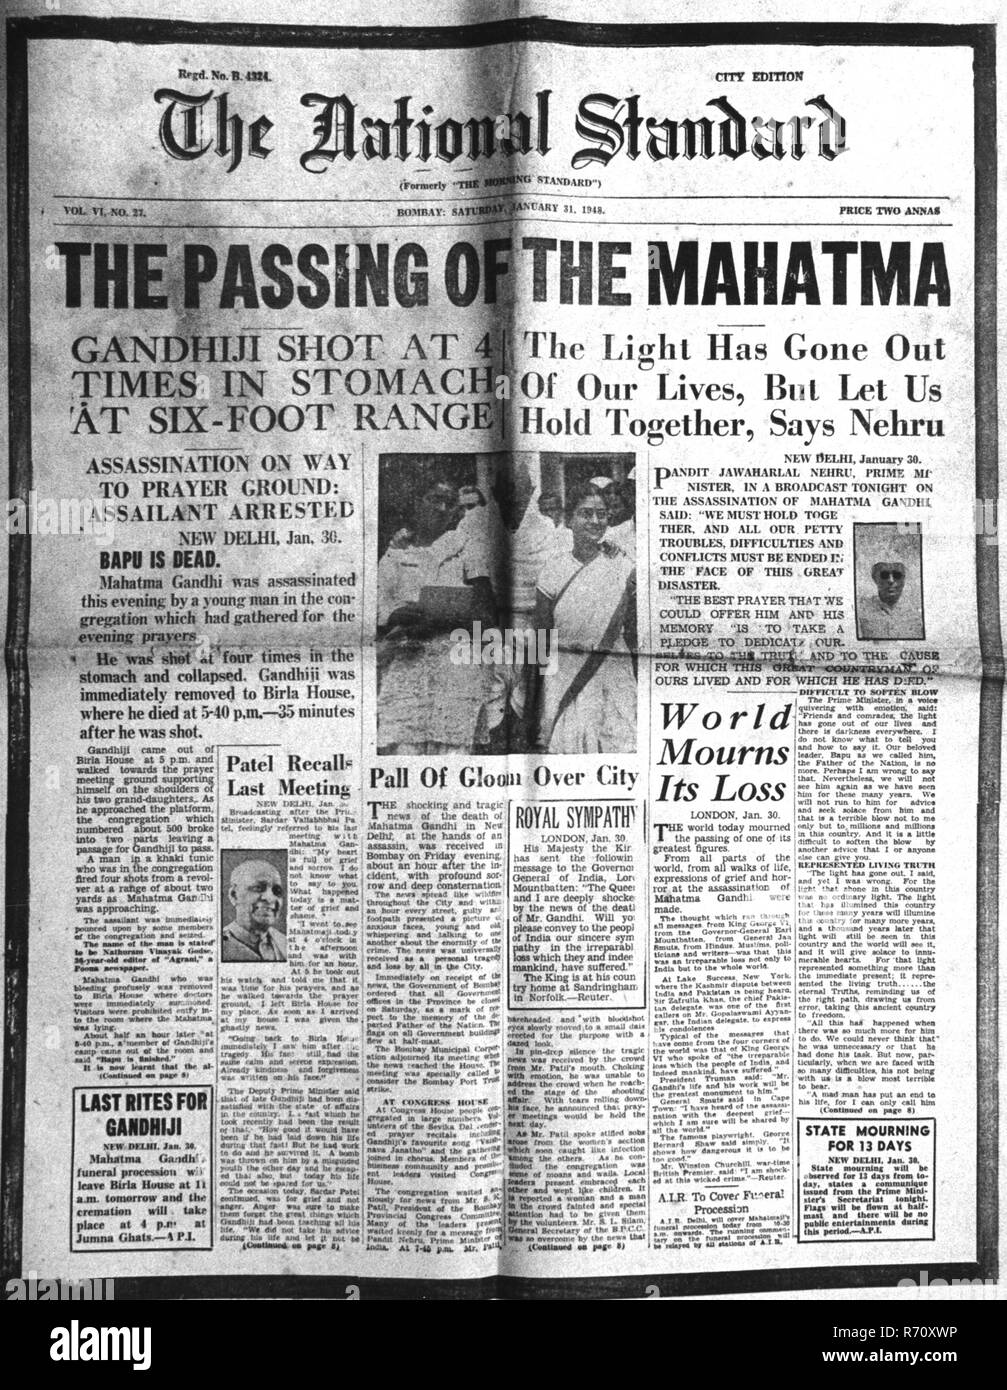 Mahatma Gandhi assassinated, The National Standard newspaper, First page, 31 January 1948, old vintage 1900s picture Stock Photo